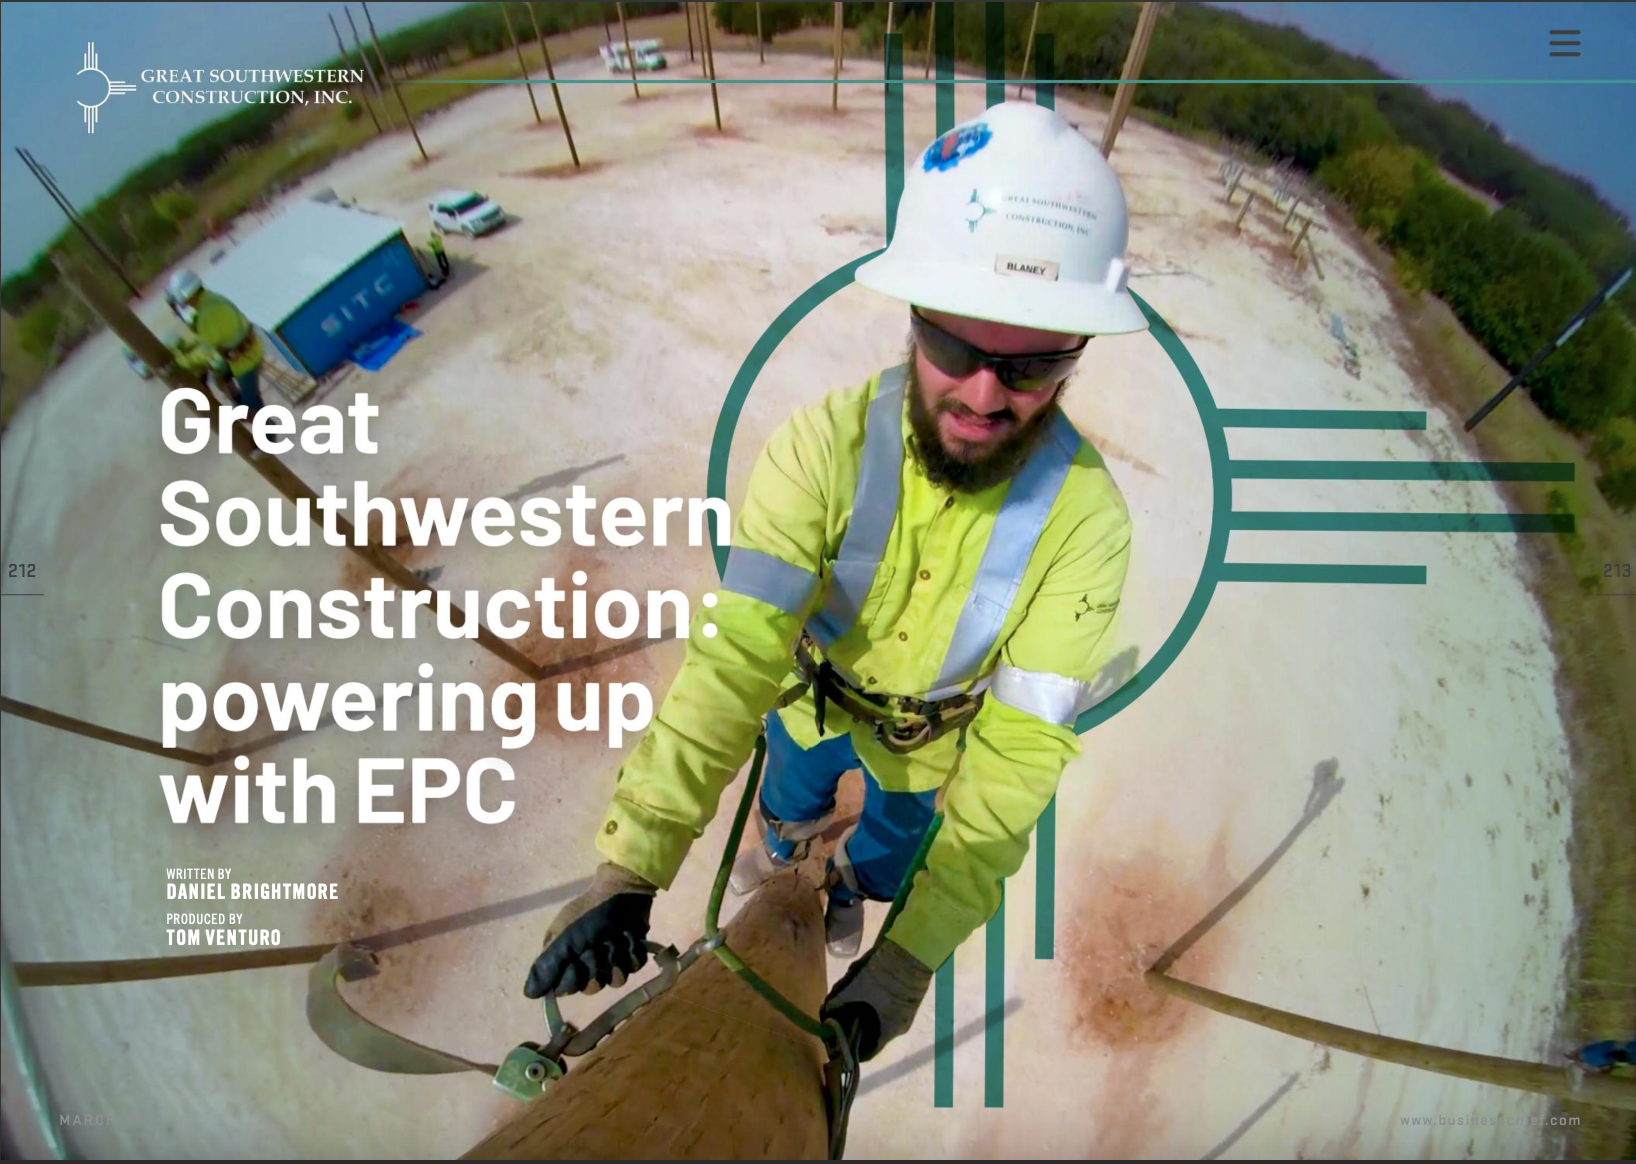 Great Southwestern Construction: Powering Up with EPC